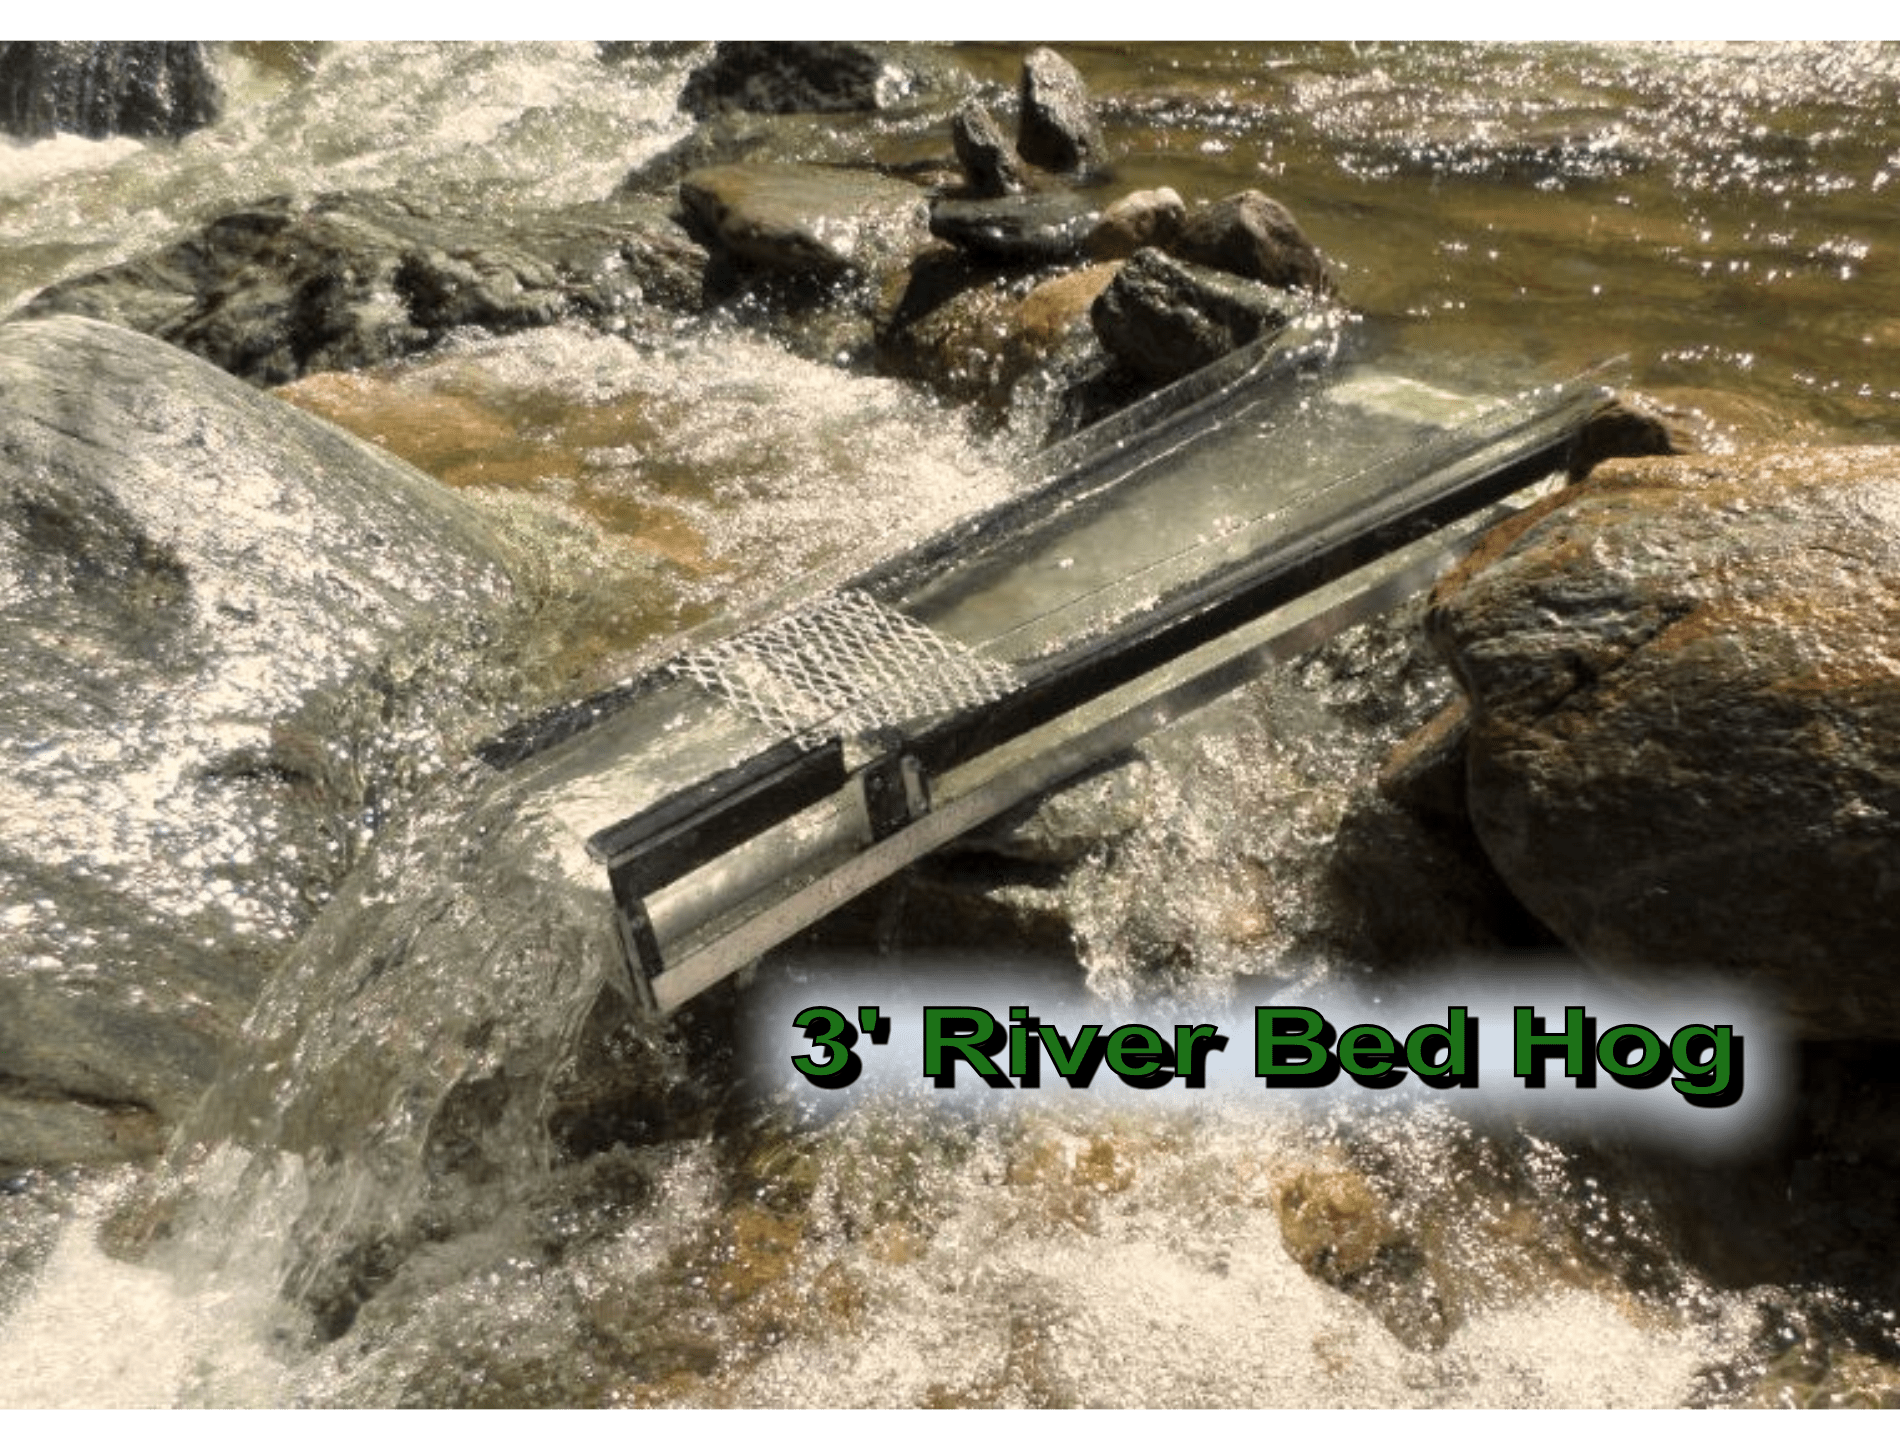 Green Mountain Gold Trap 36" River Hog Fluid Bed Sluice at Work in Stream